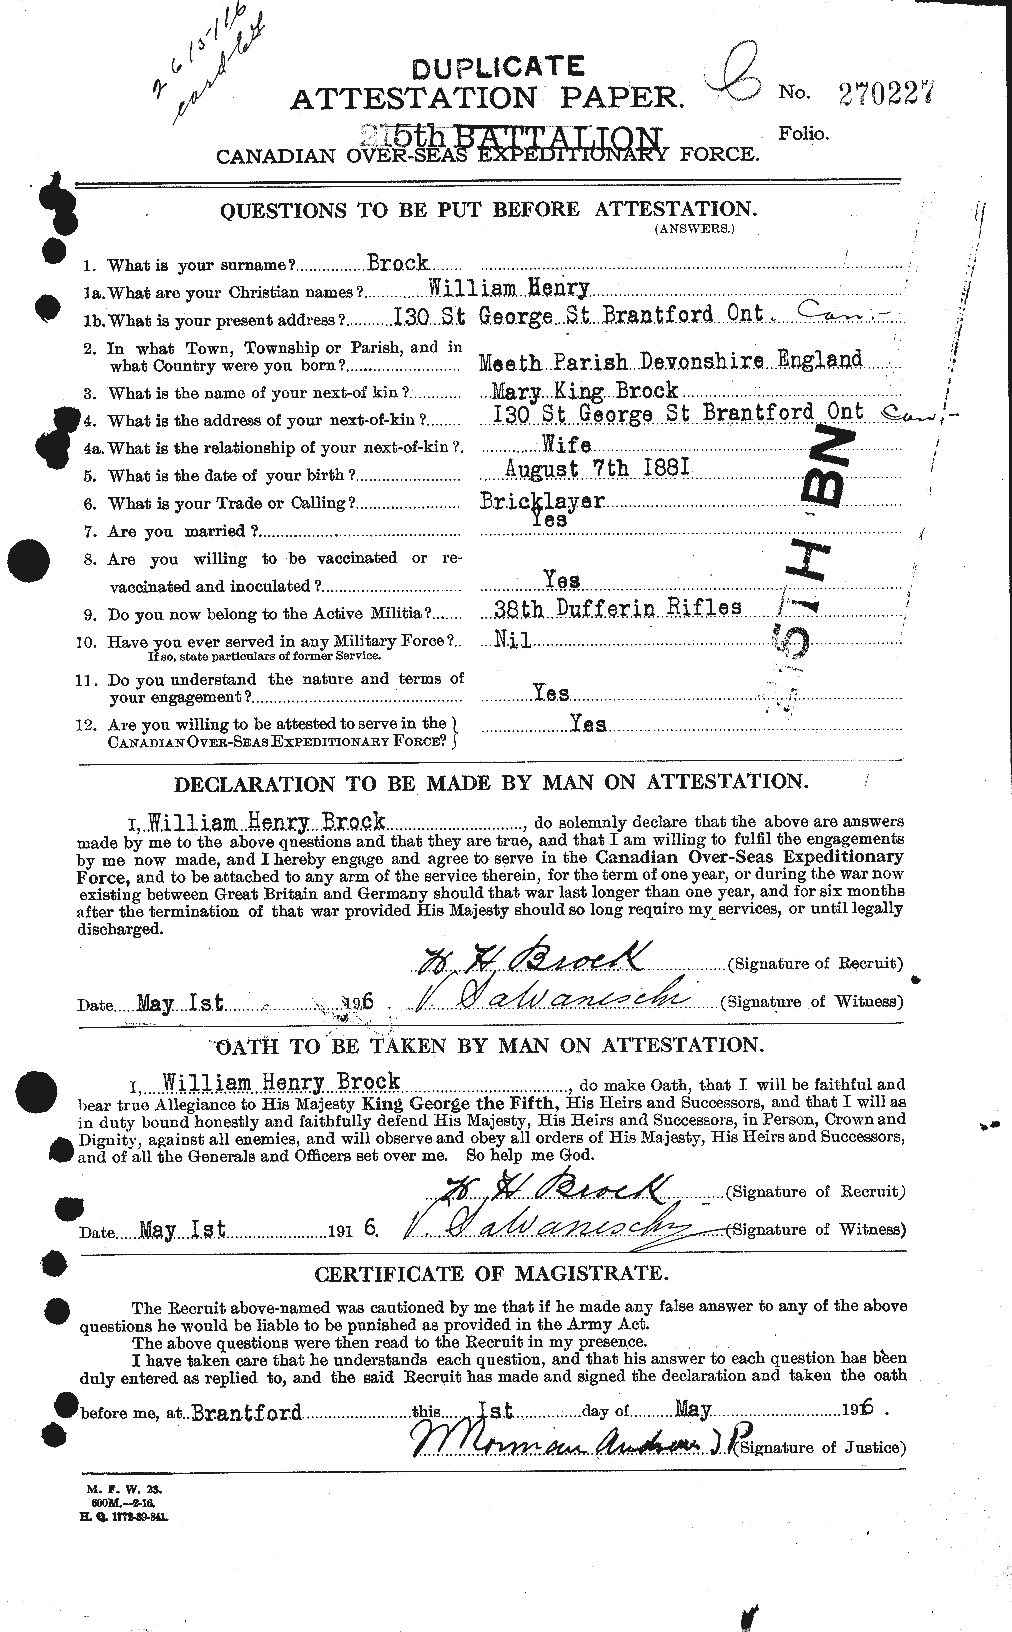 Personnel Records of the First World War - CEF 258250a